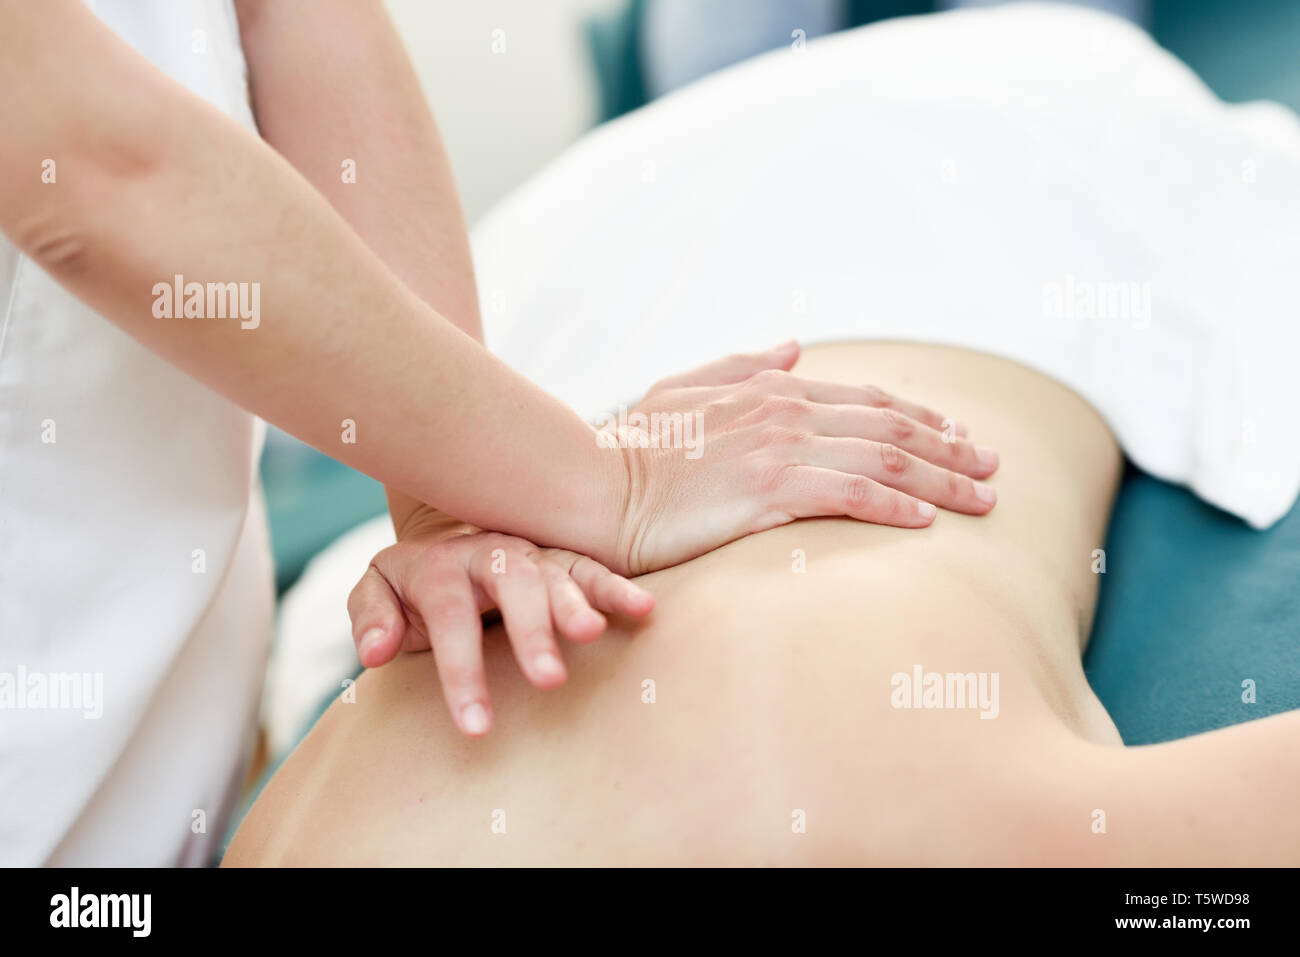 Young woman receiving a back massage by professional therapist. Stock Photo